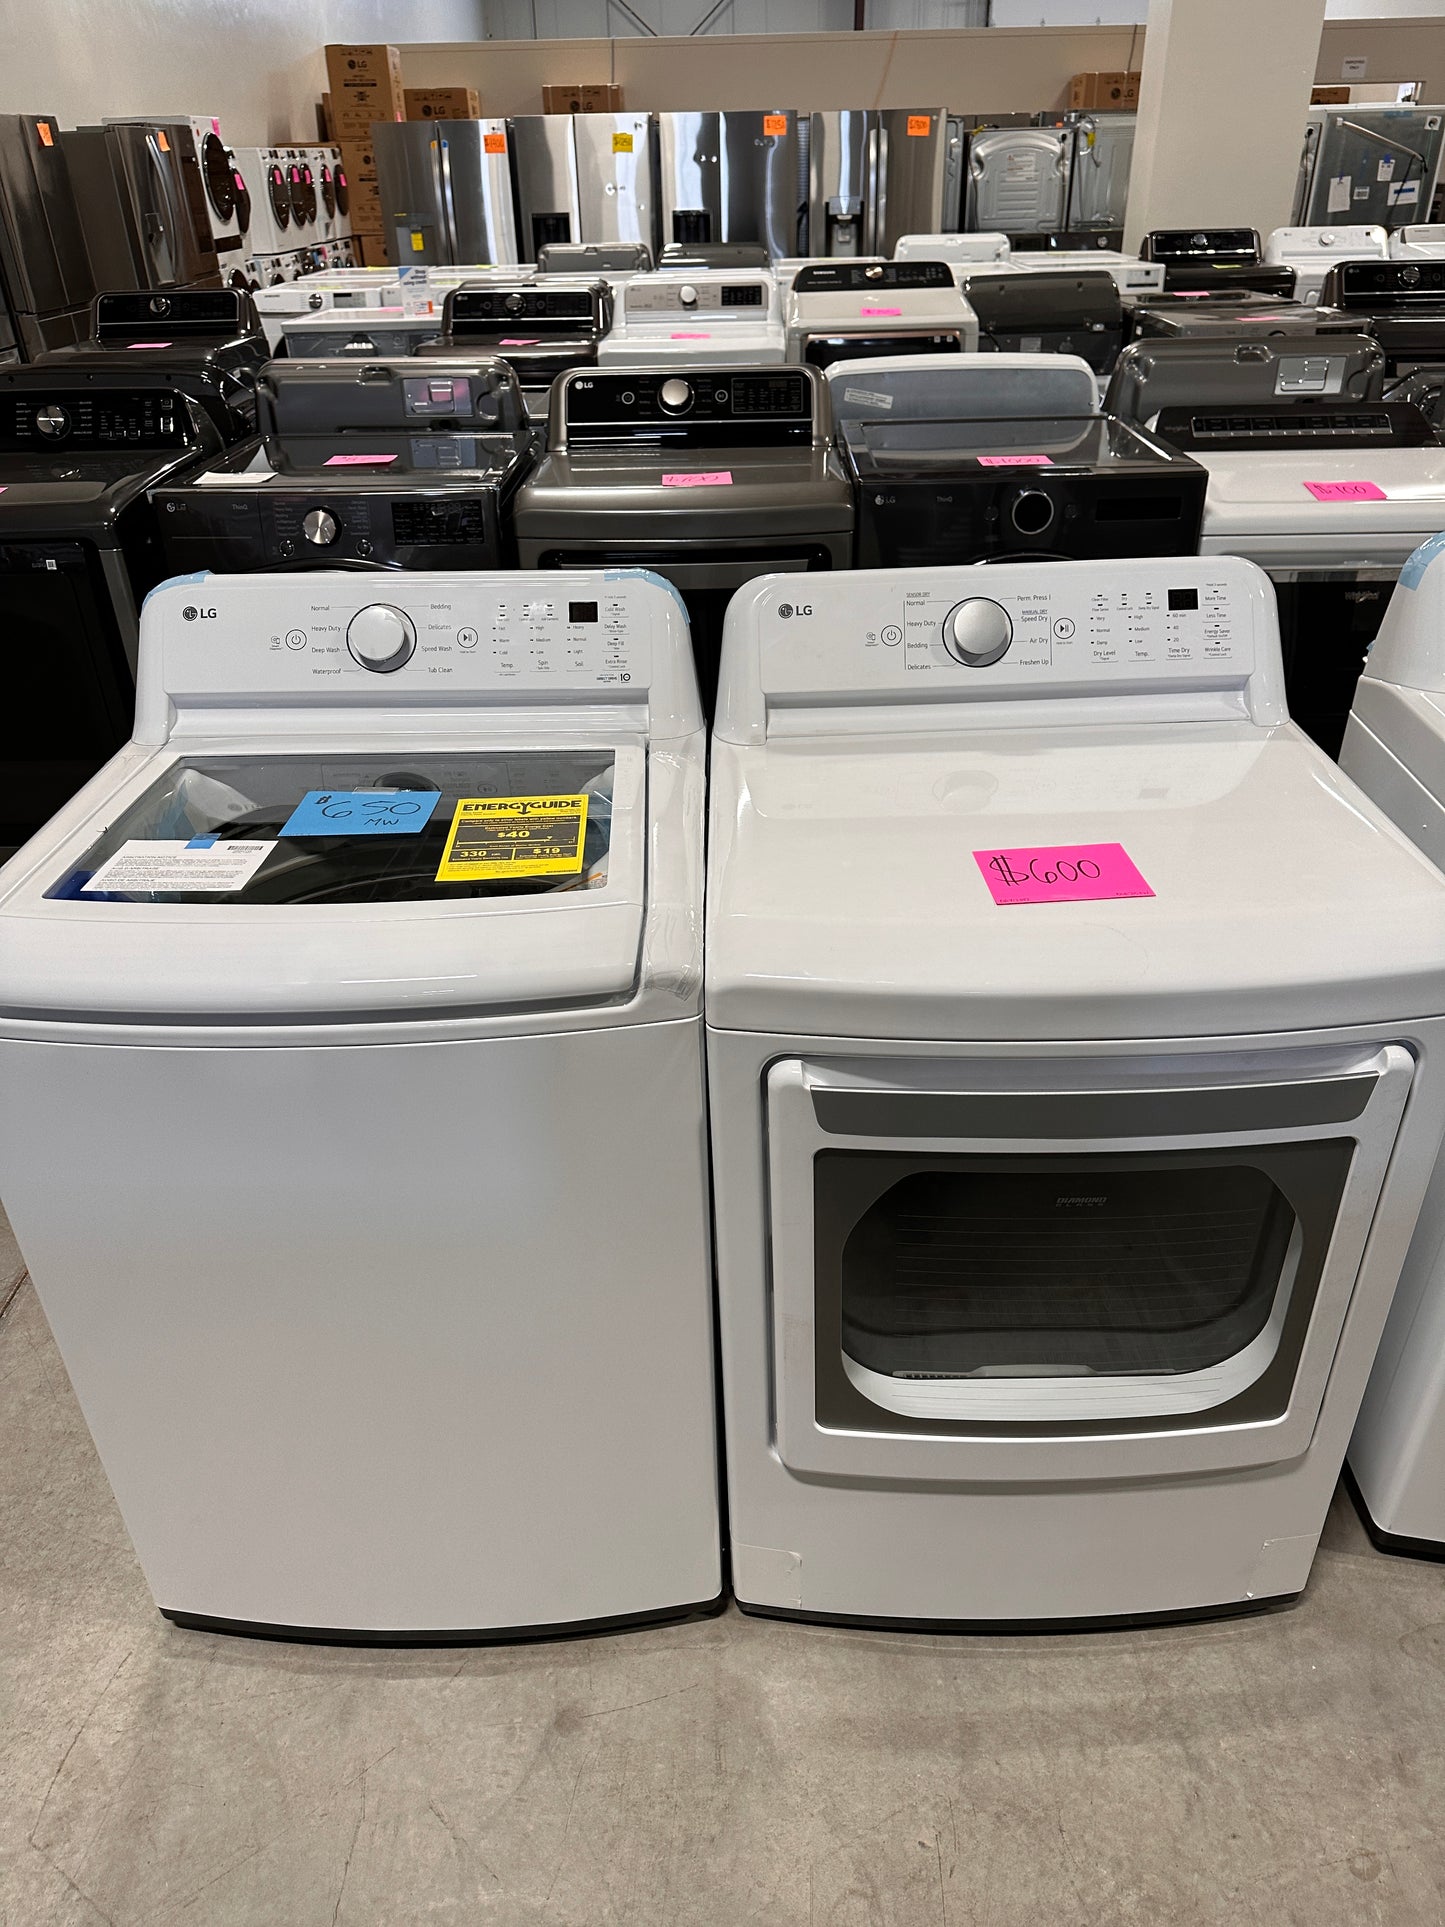 NEW ELECTRIC DRYER TOP LOAD WASHER LAUNDRY SET - WAS12812